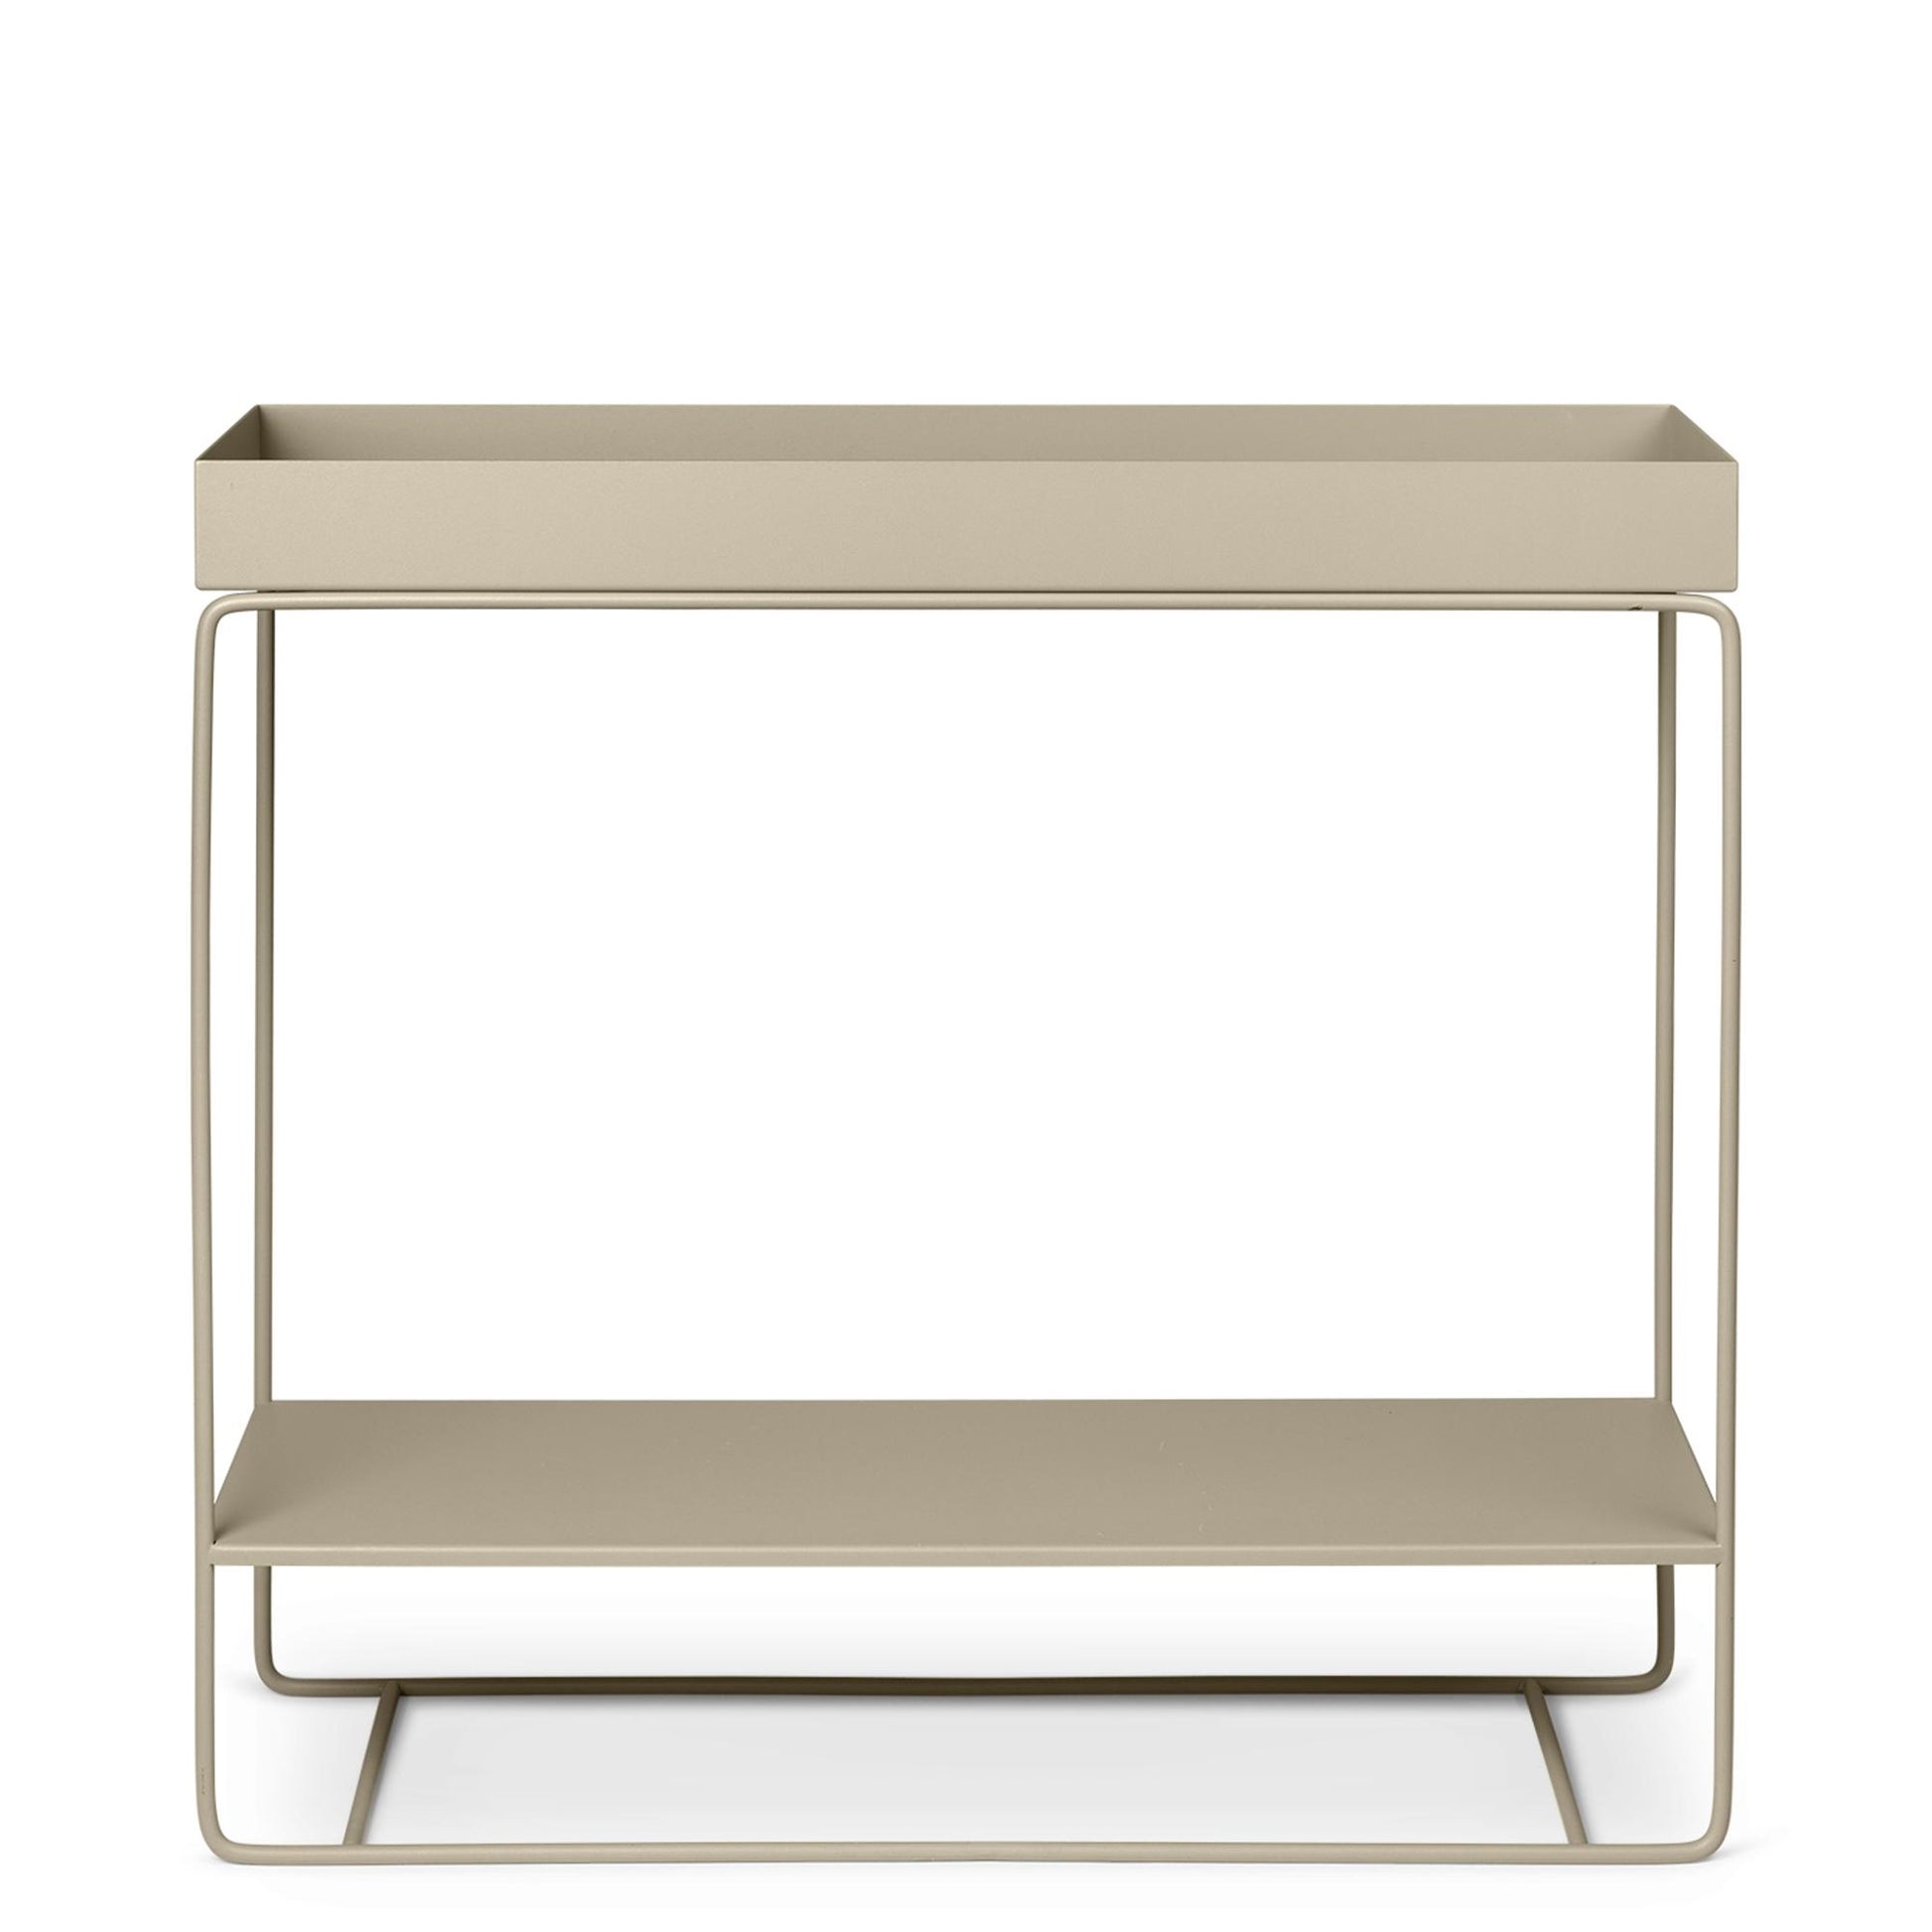 Plant Box Two-Tier by Ferm Living #Cashmere